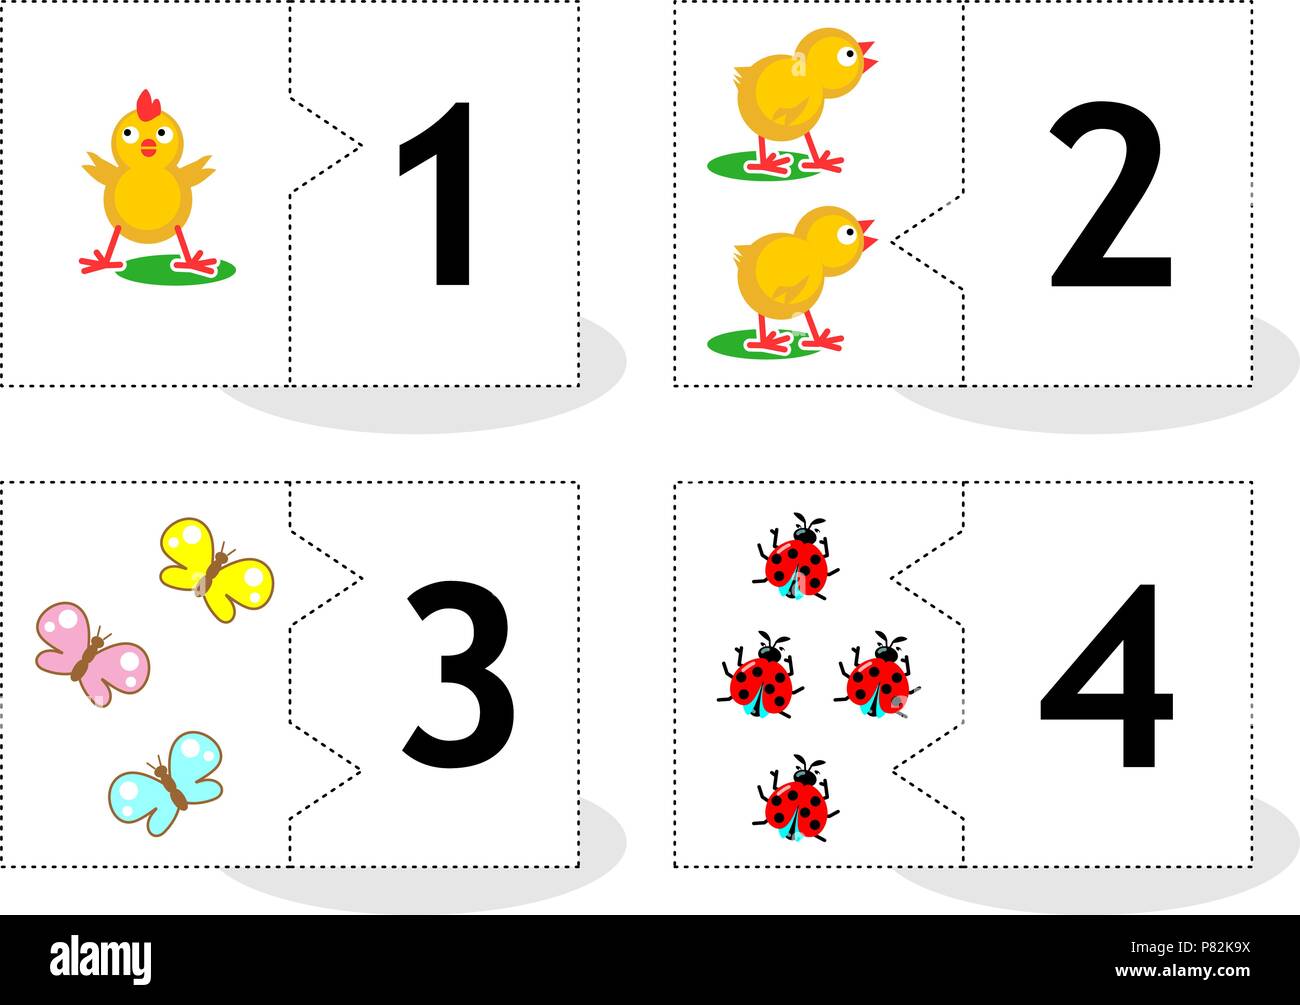 Learn counting 2-part puzzle cards to cut out and play, with chicks, butterflies, ladybugs, numbers 1 - 4 Stock Vector